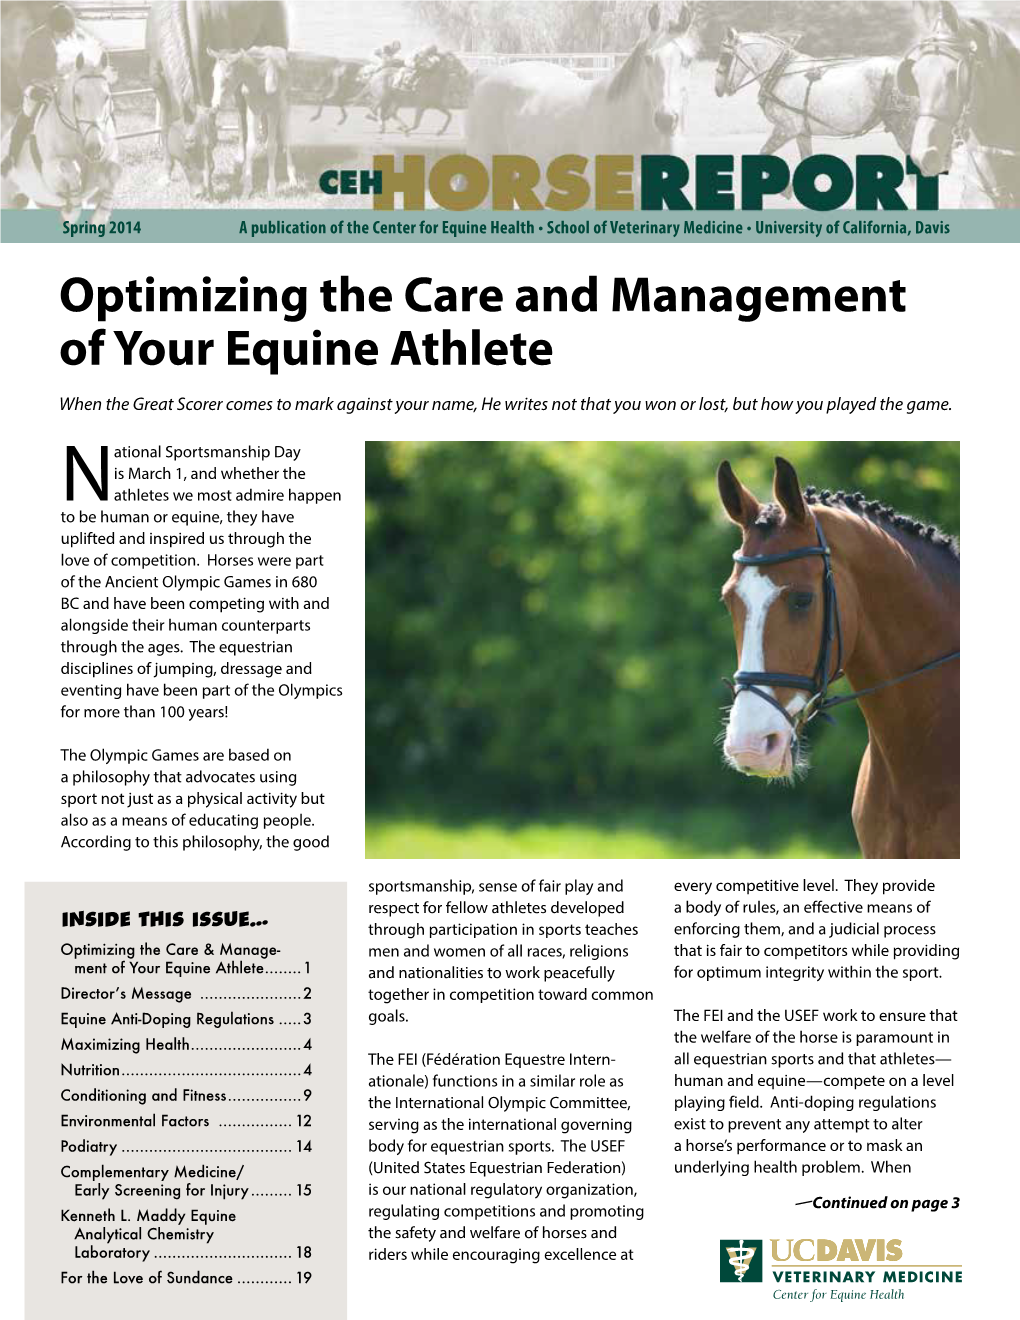 Optimizing the Care and Management of Your Equine Athlete